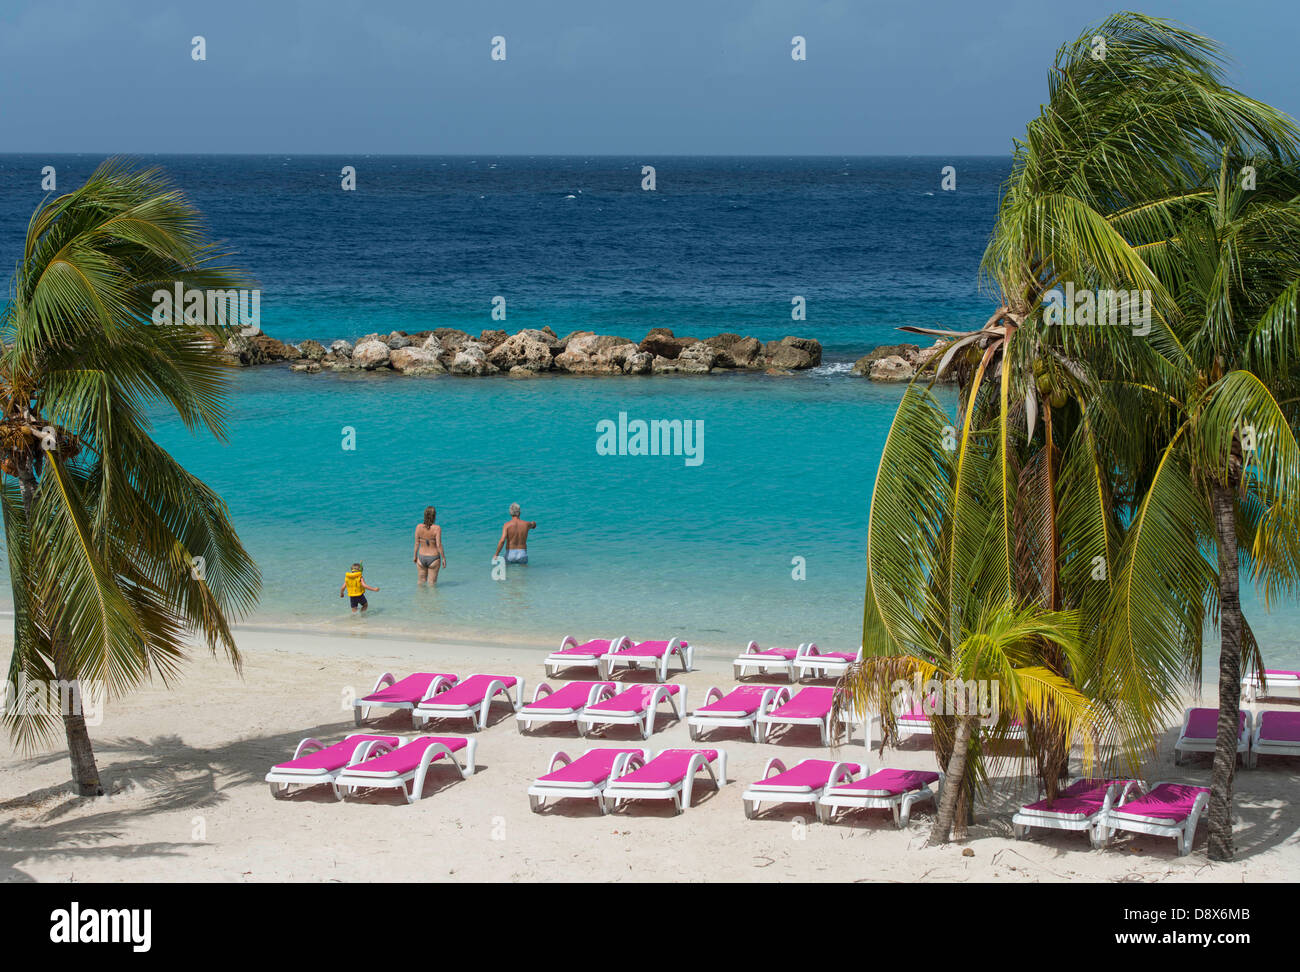 Tourists are standing on a beach with palms and beach loungers. Stock Photo